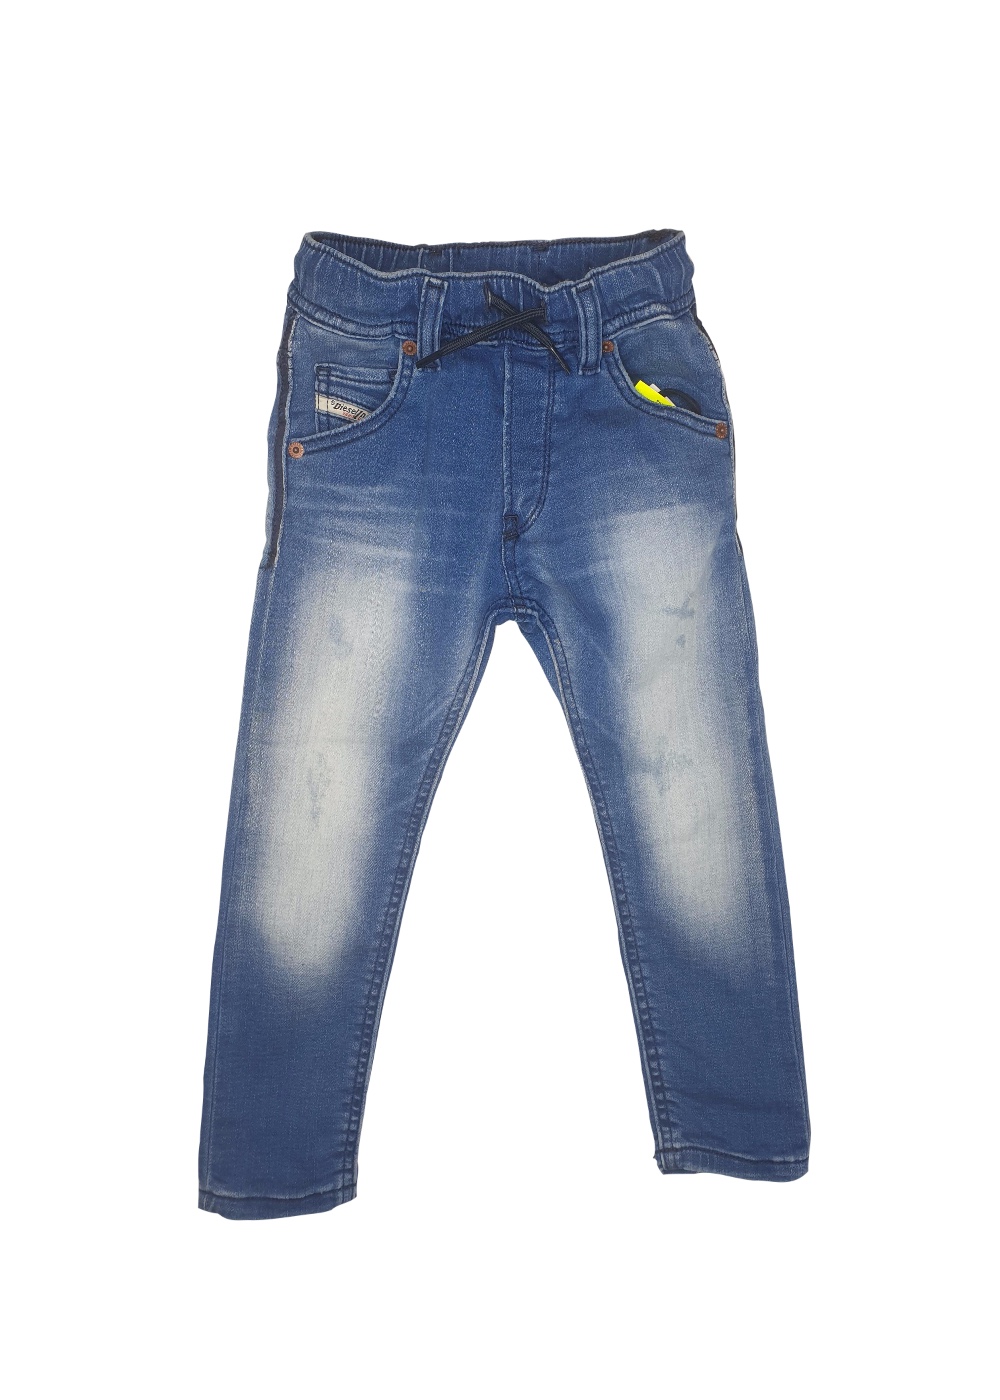 Featured image for “DIESEL JOGGJEANS”